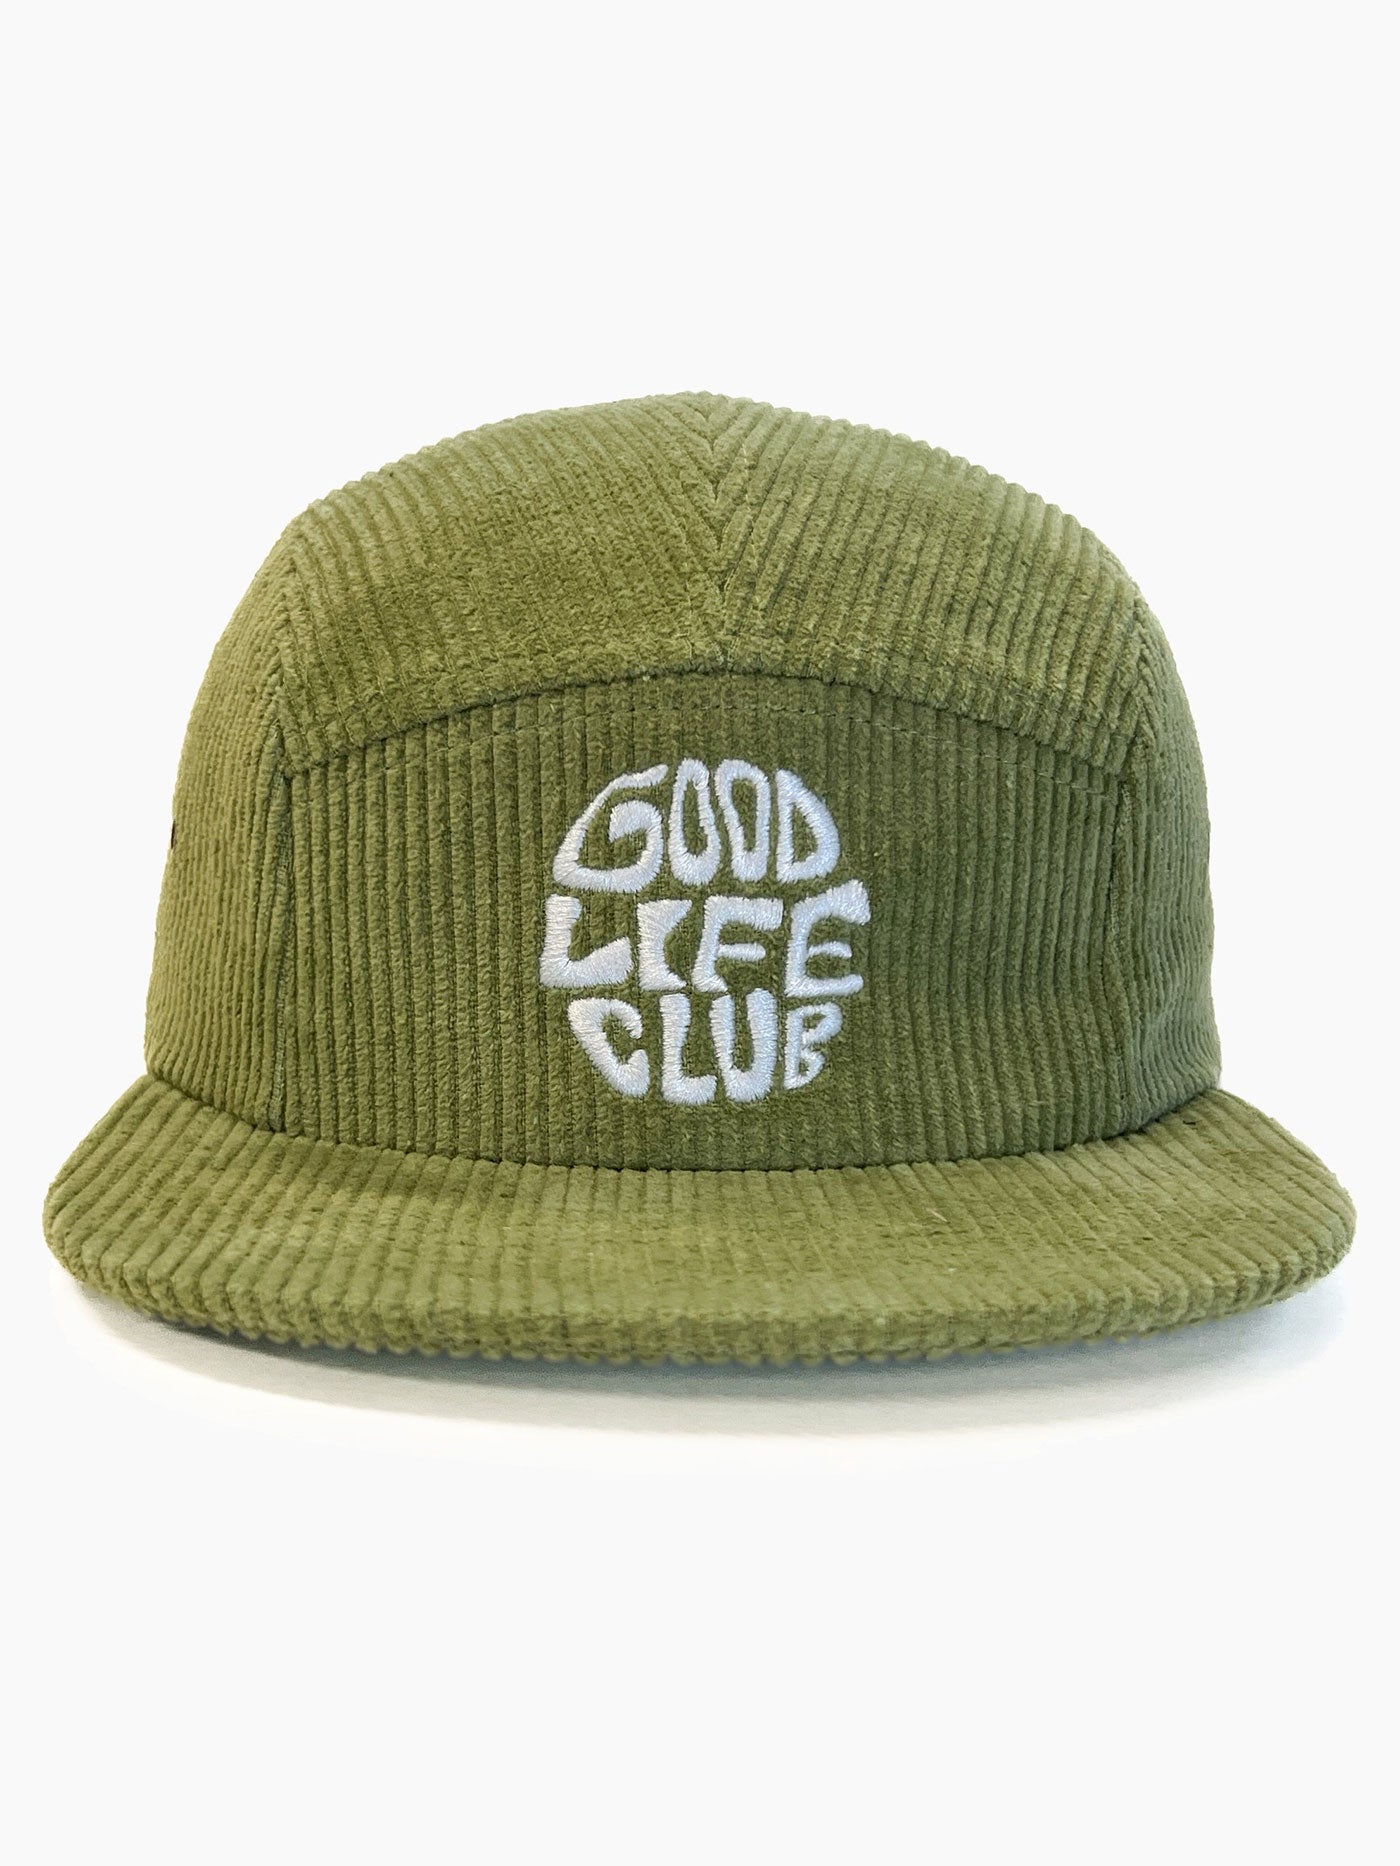 Notice The Reckless Good Life Club Corduroy Strapback Hat